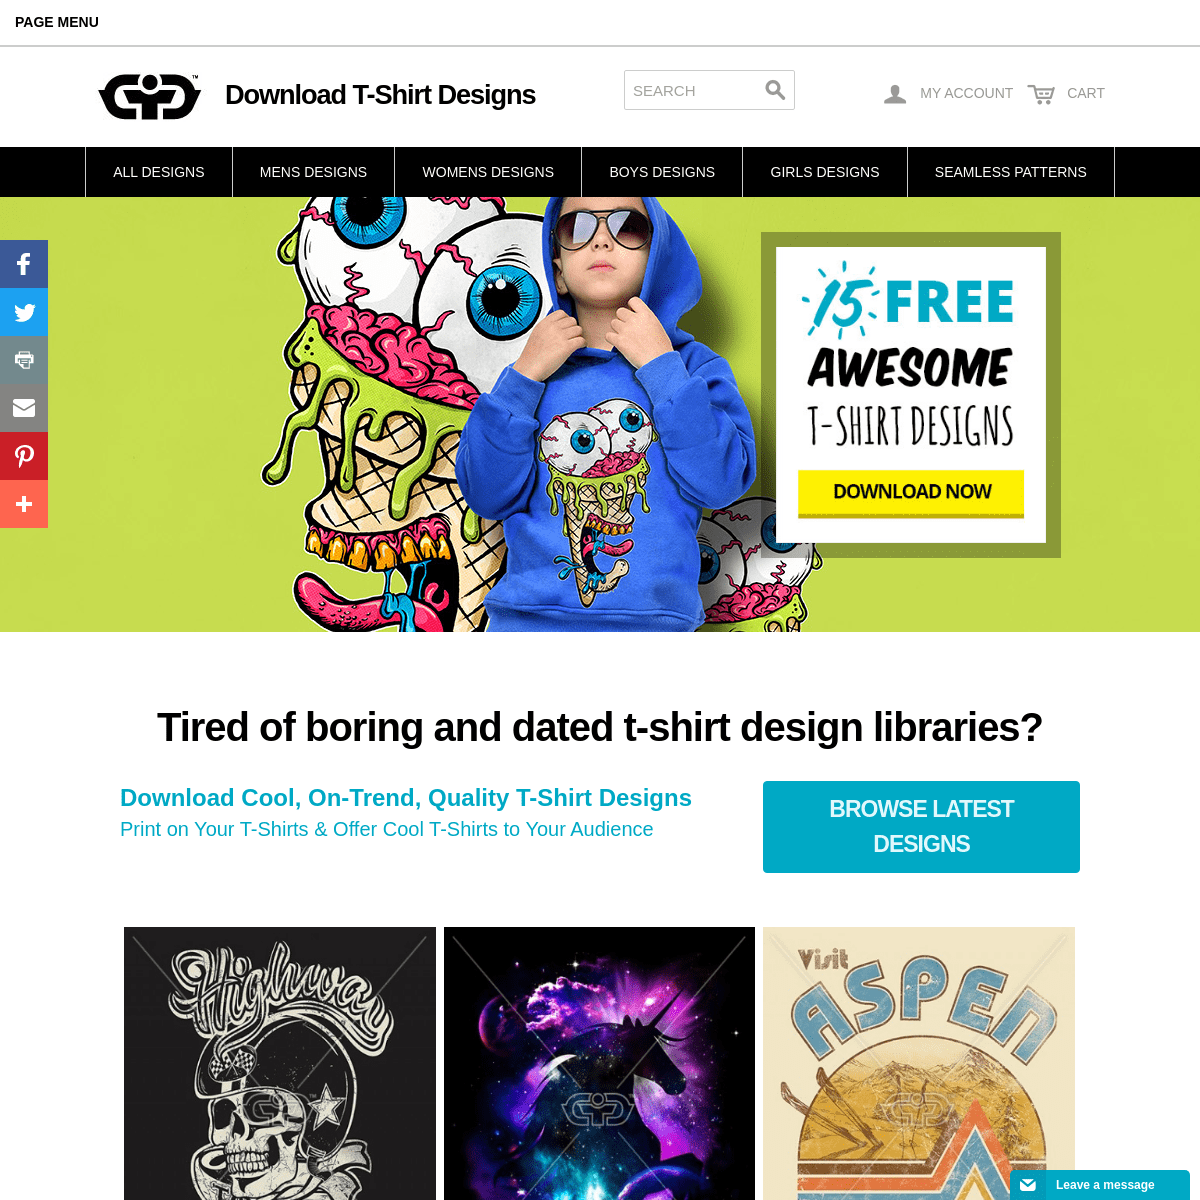 A complete backup of downloadt-shirtdesigns.com